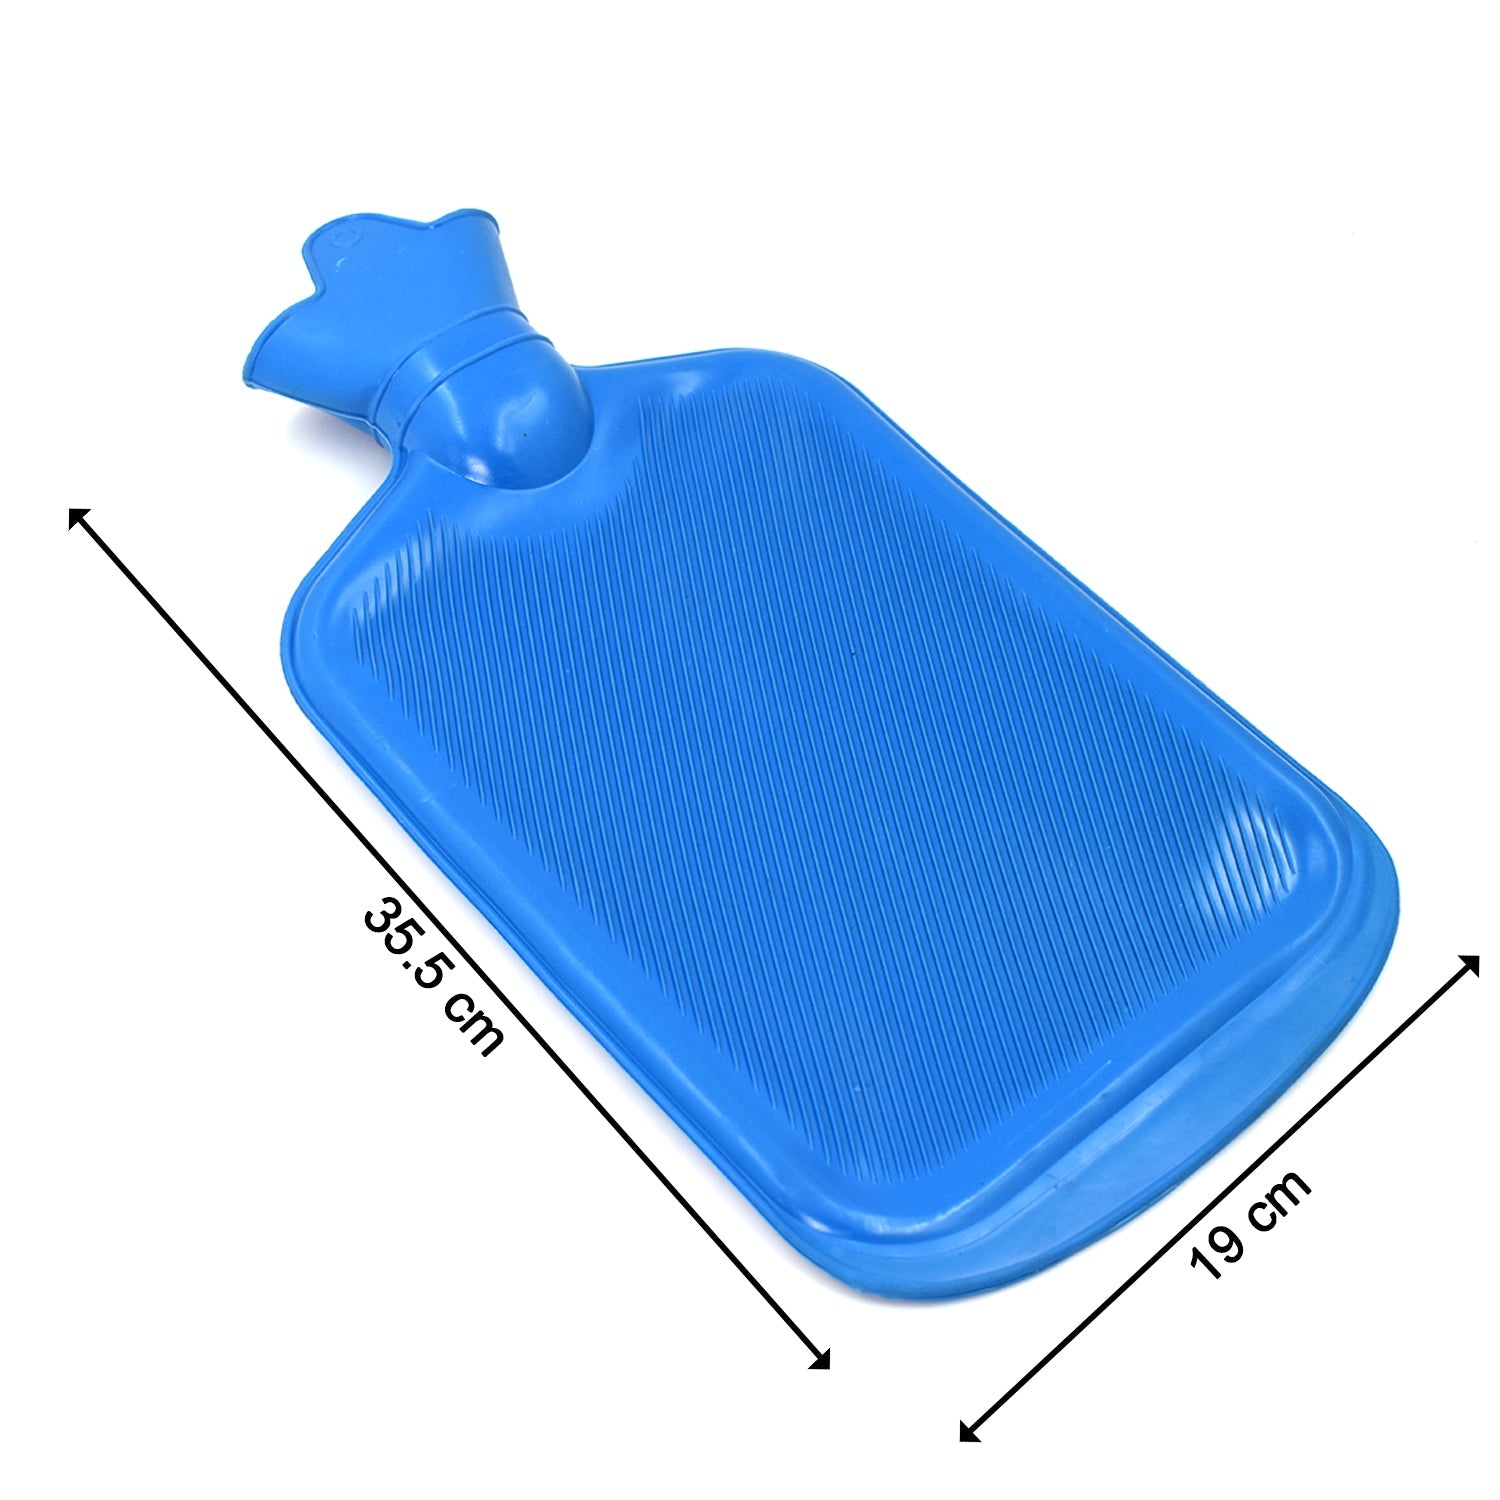 1454 Hot water Bag 2000 ML used in all kinds of household and medical purposes as a pain relief from muscle and neural problems.